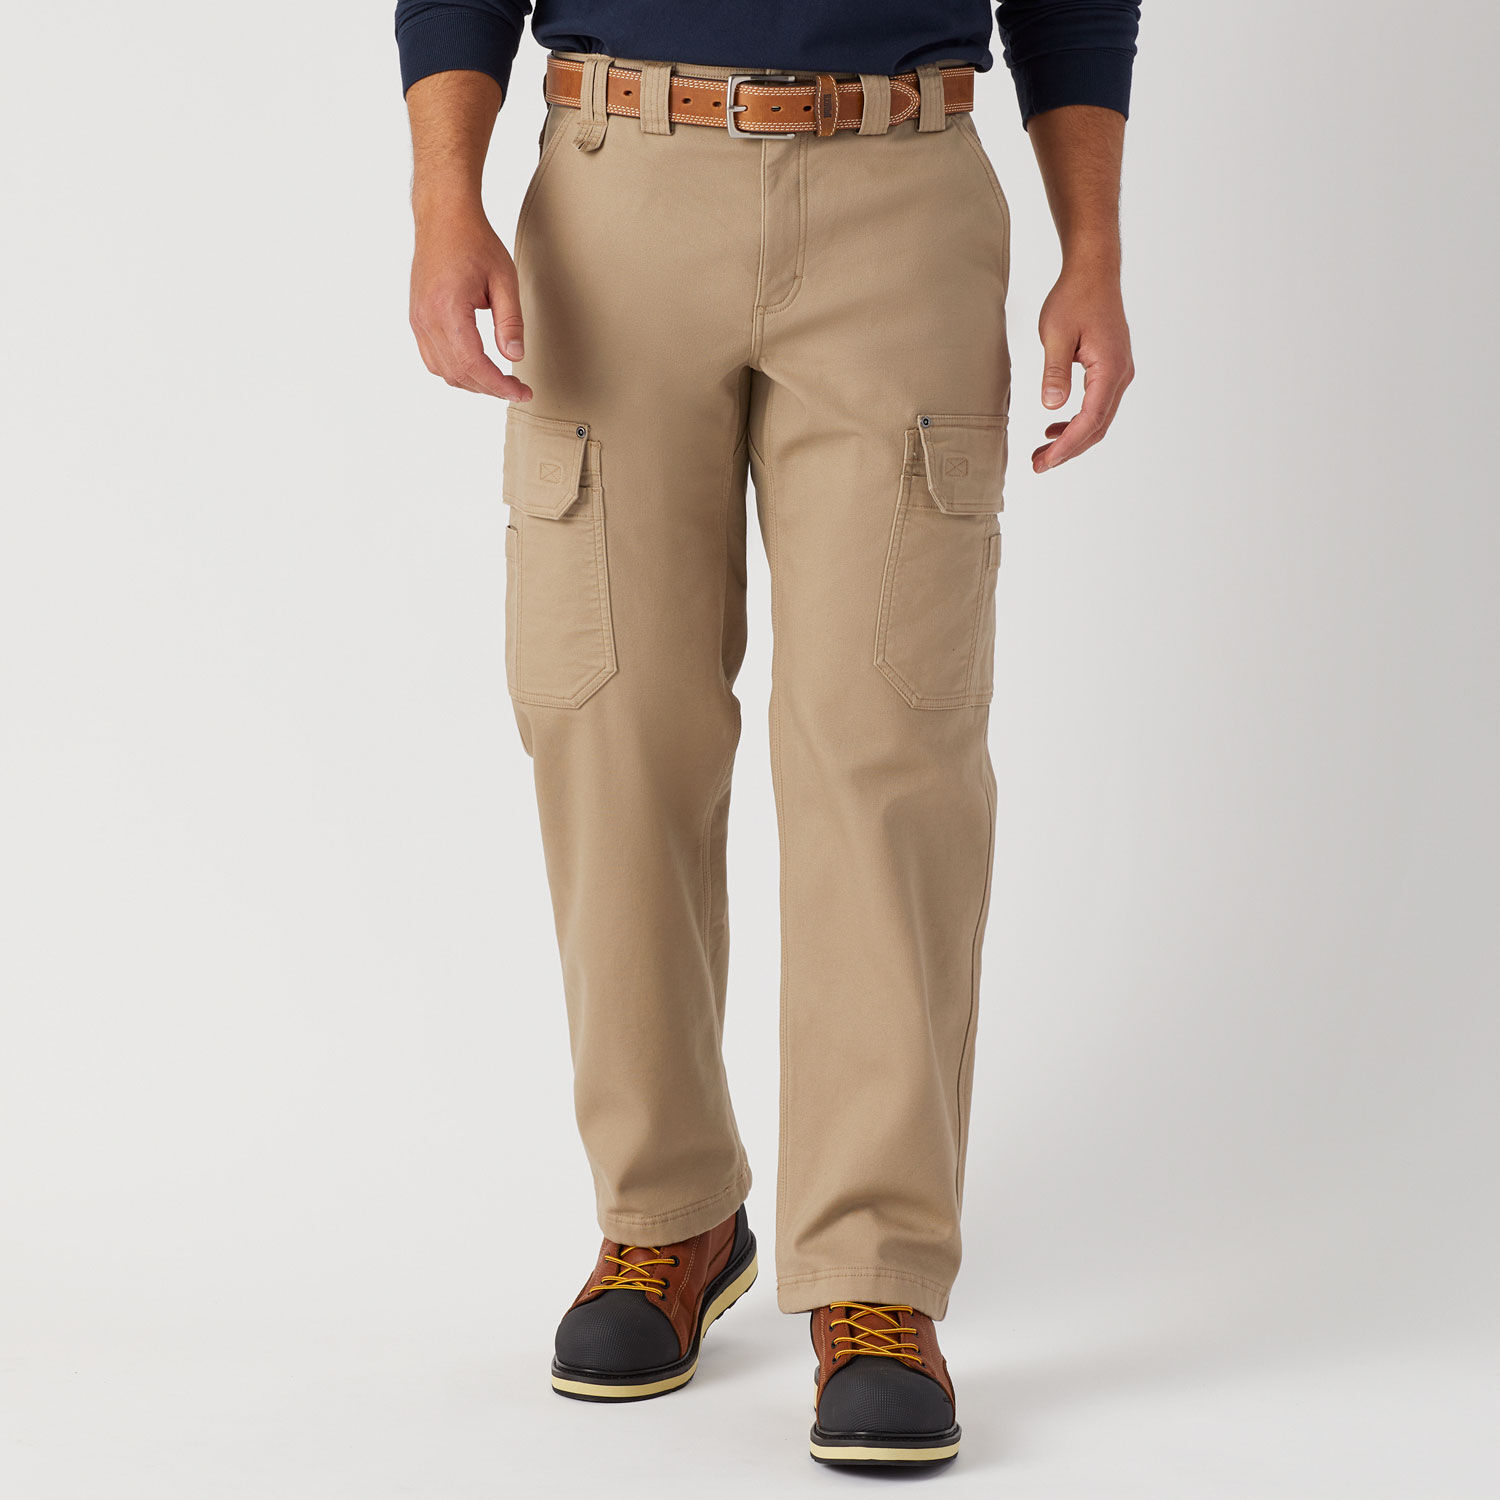 Flannel Lined Pants The Thing You Never Knew You Needed  Lands End